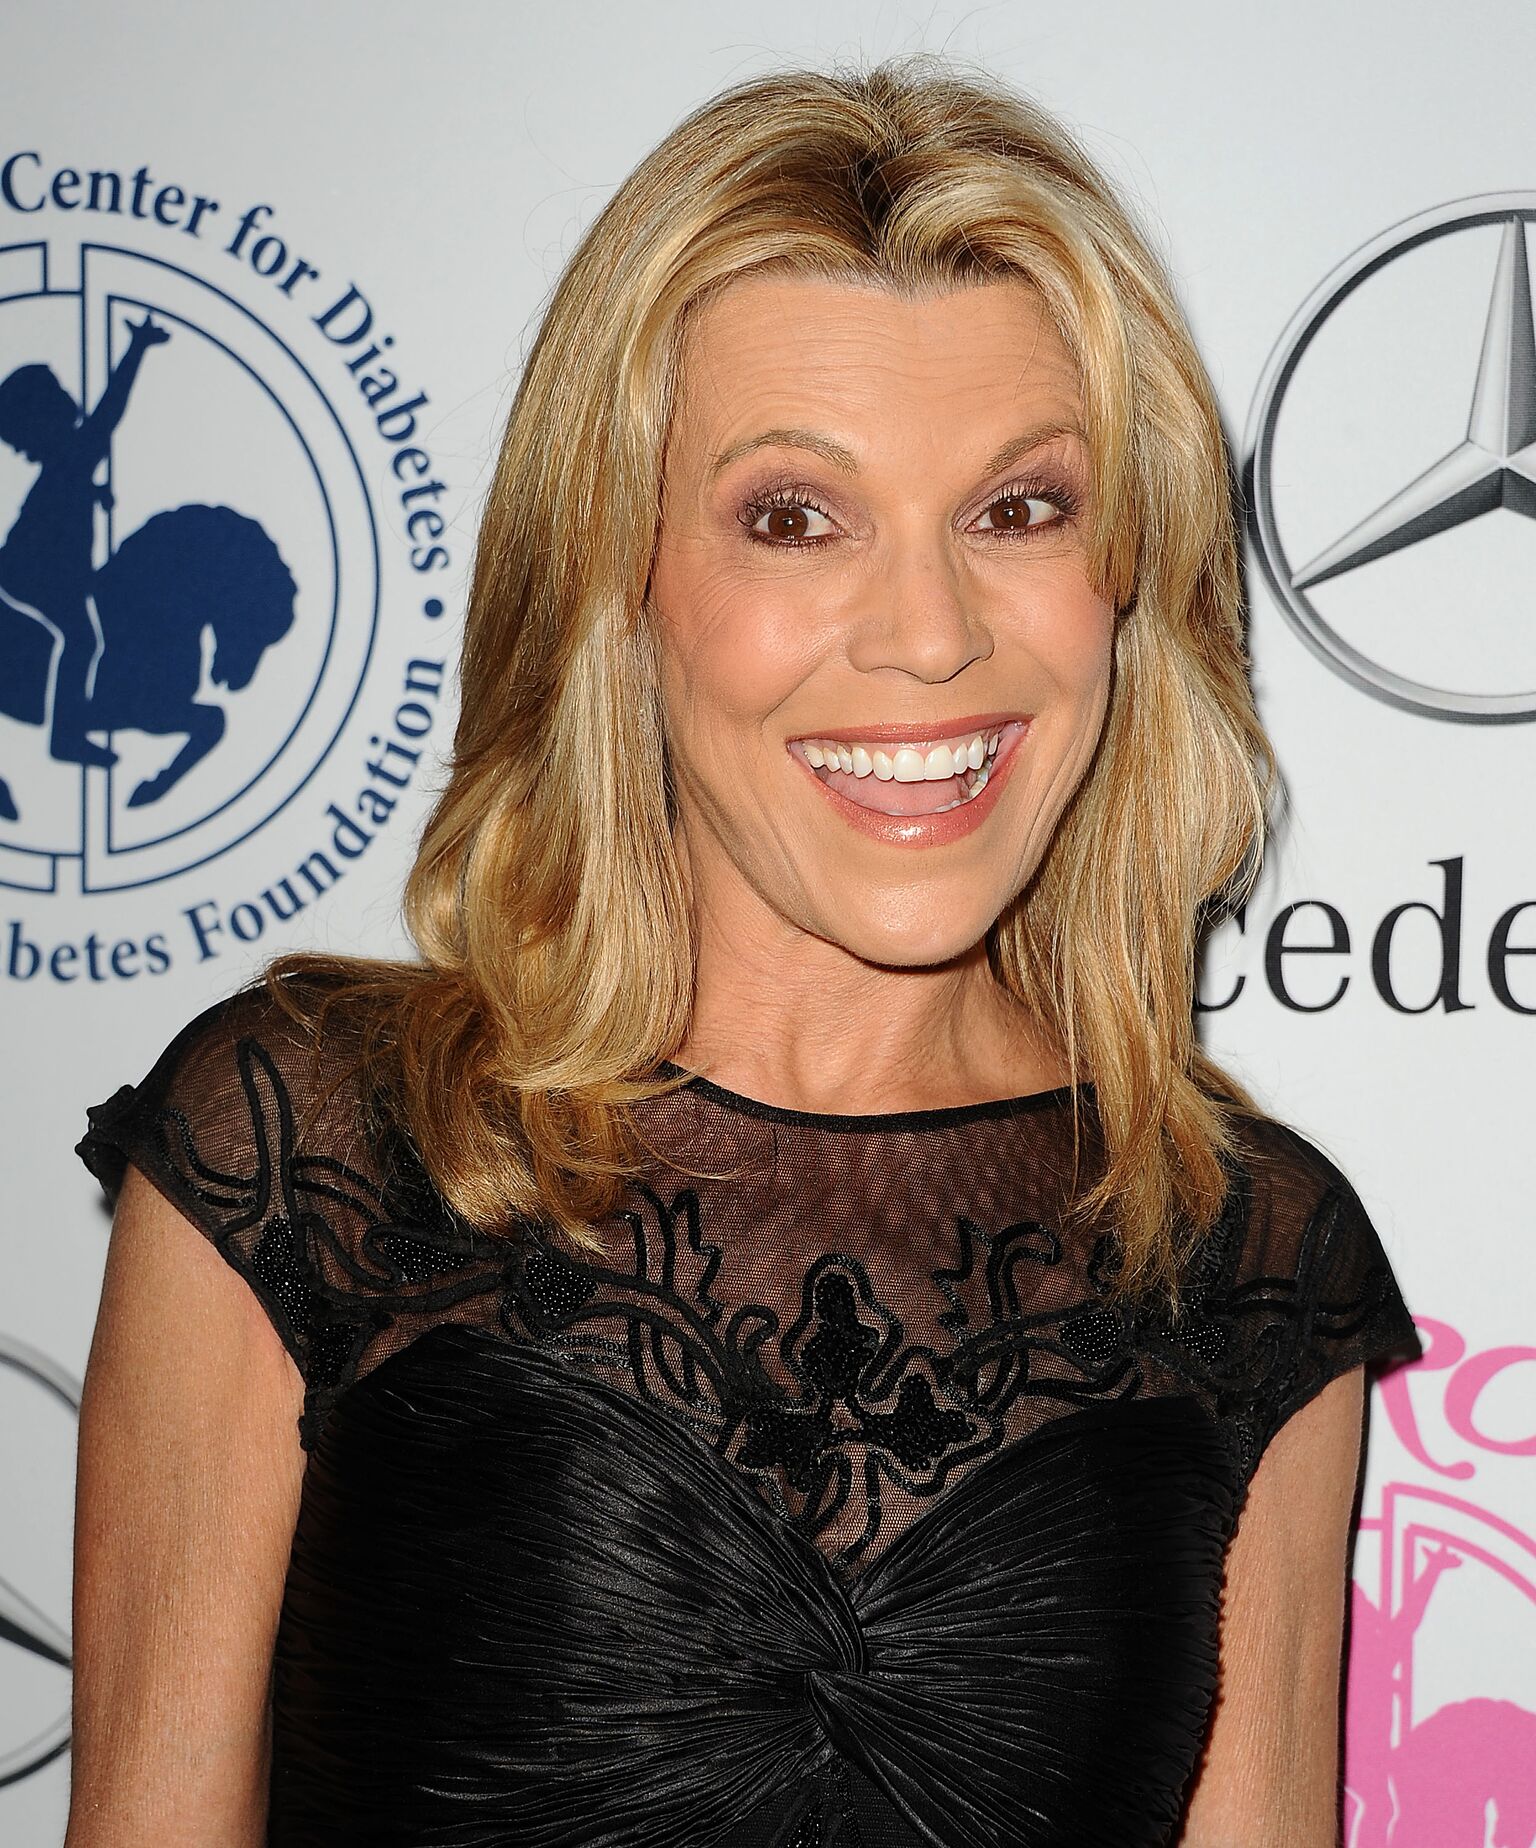 Vanna White attends the 2014 Carousel of Hope Ball at The Beverly Hilton Hotel  l Getty Images